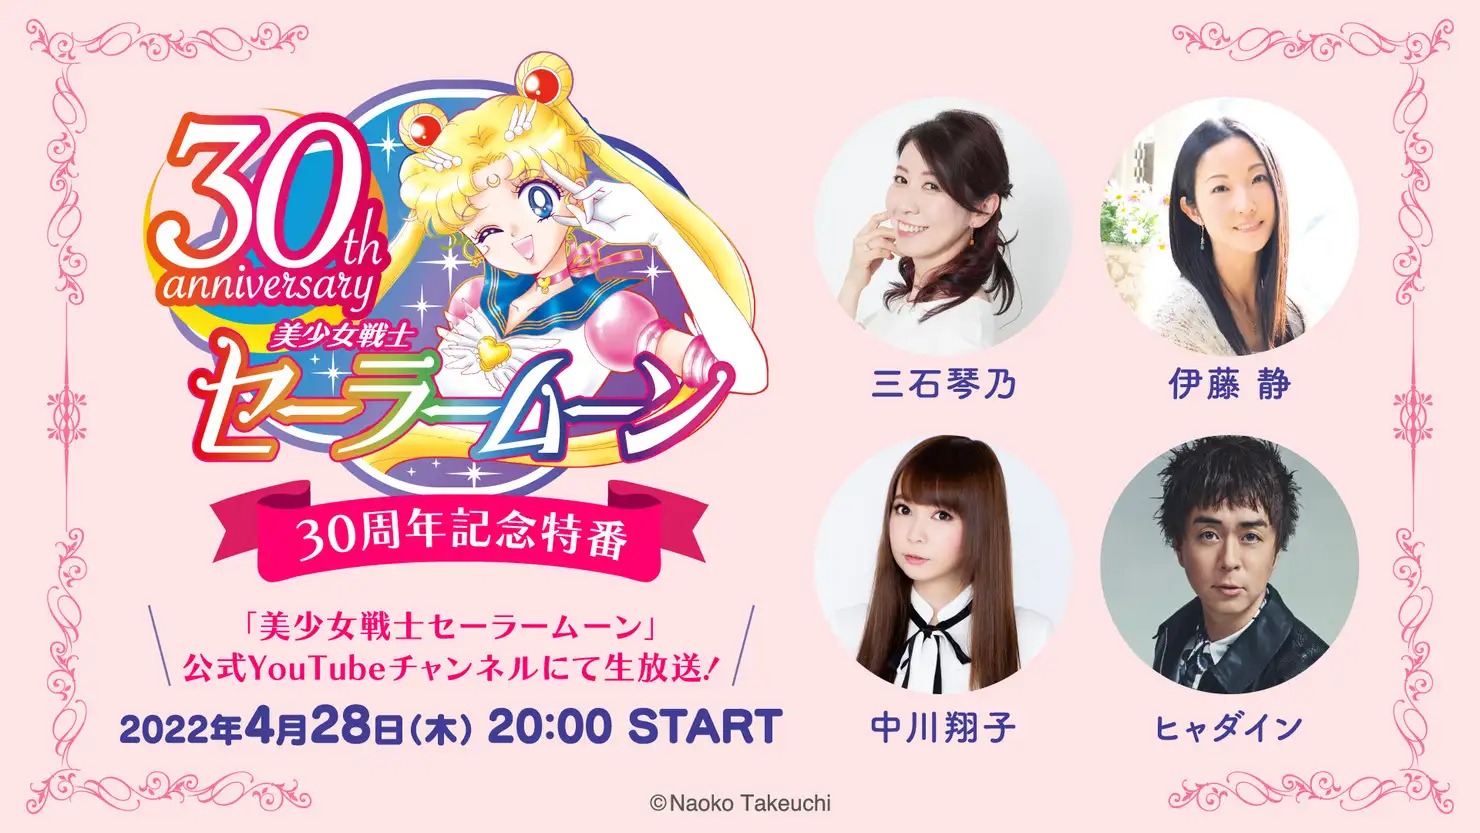 Sailor Moon 30th anniversary special image